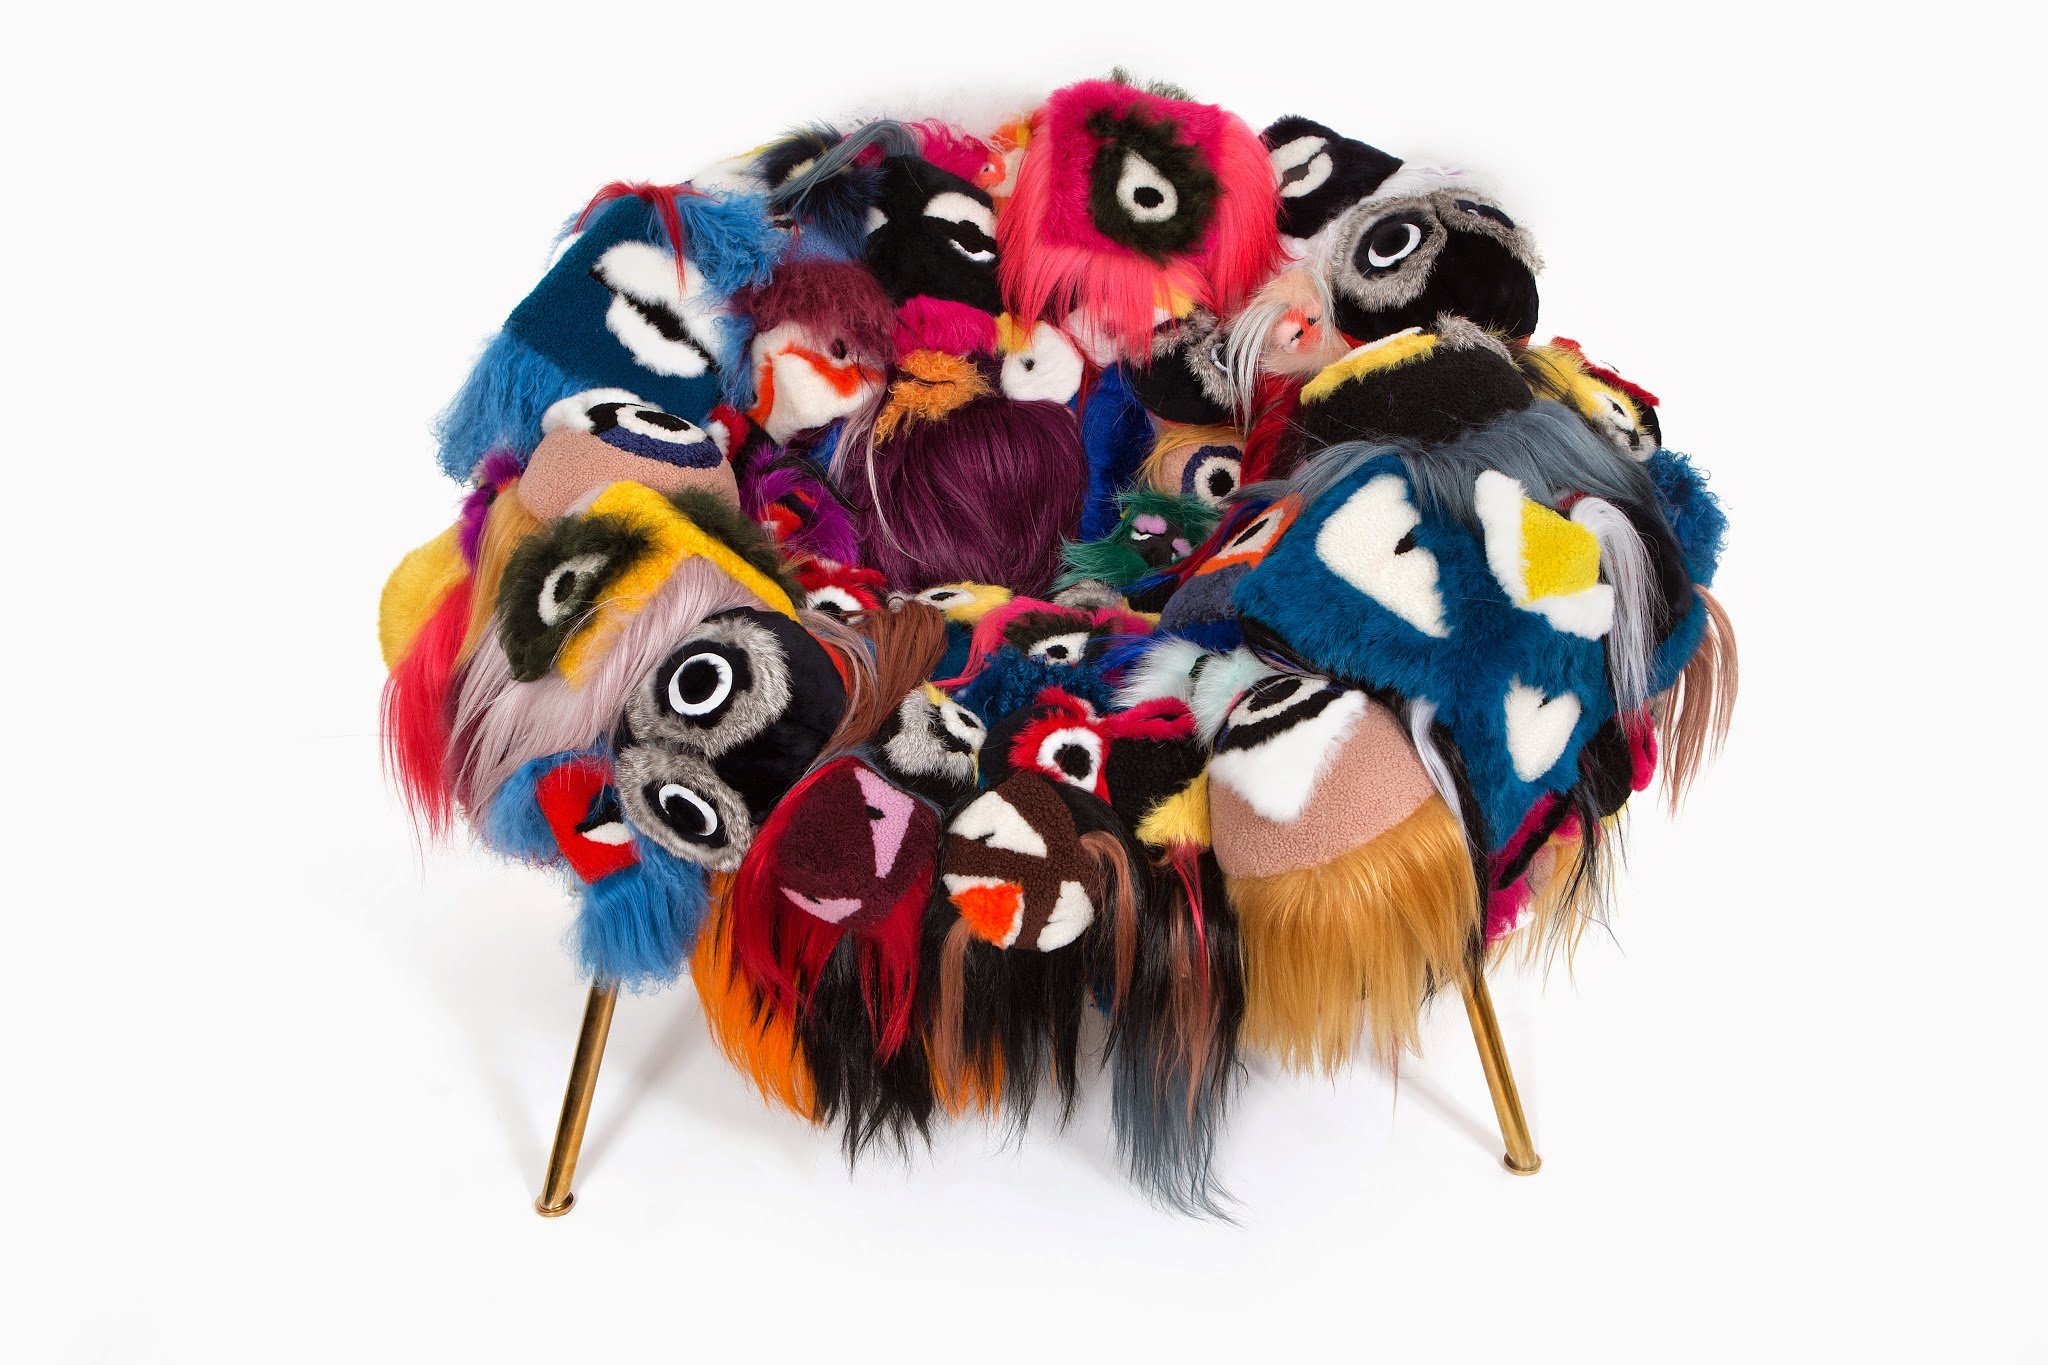 Fendi's "The Armchair of Thousand Eyes" at Salone del Mobile